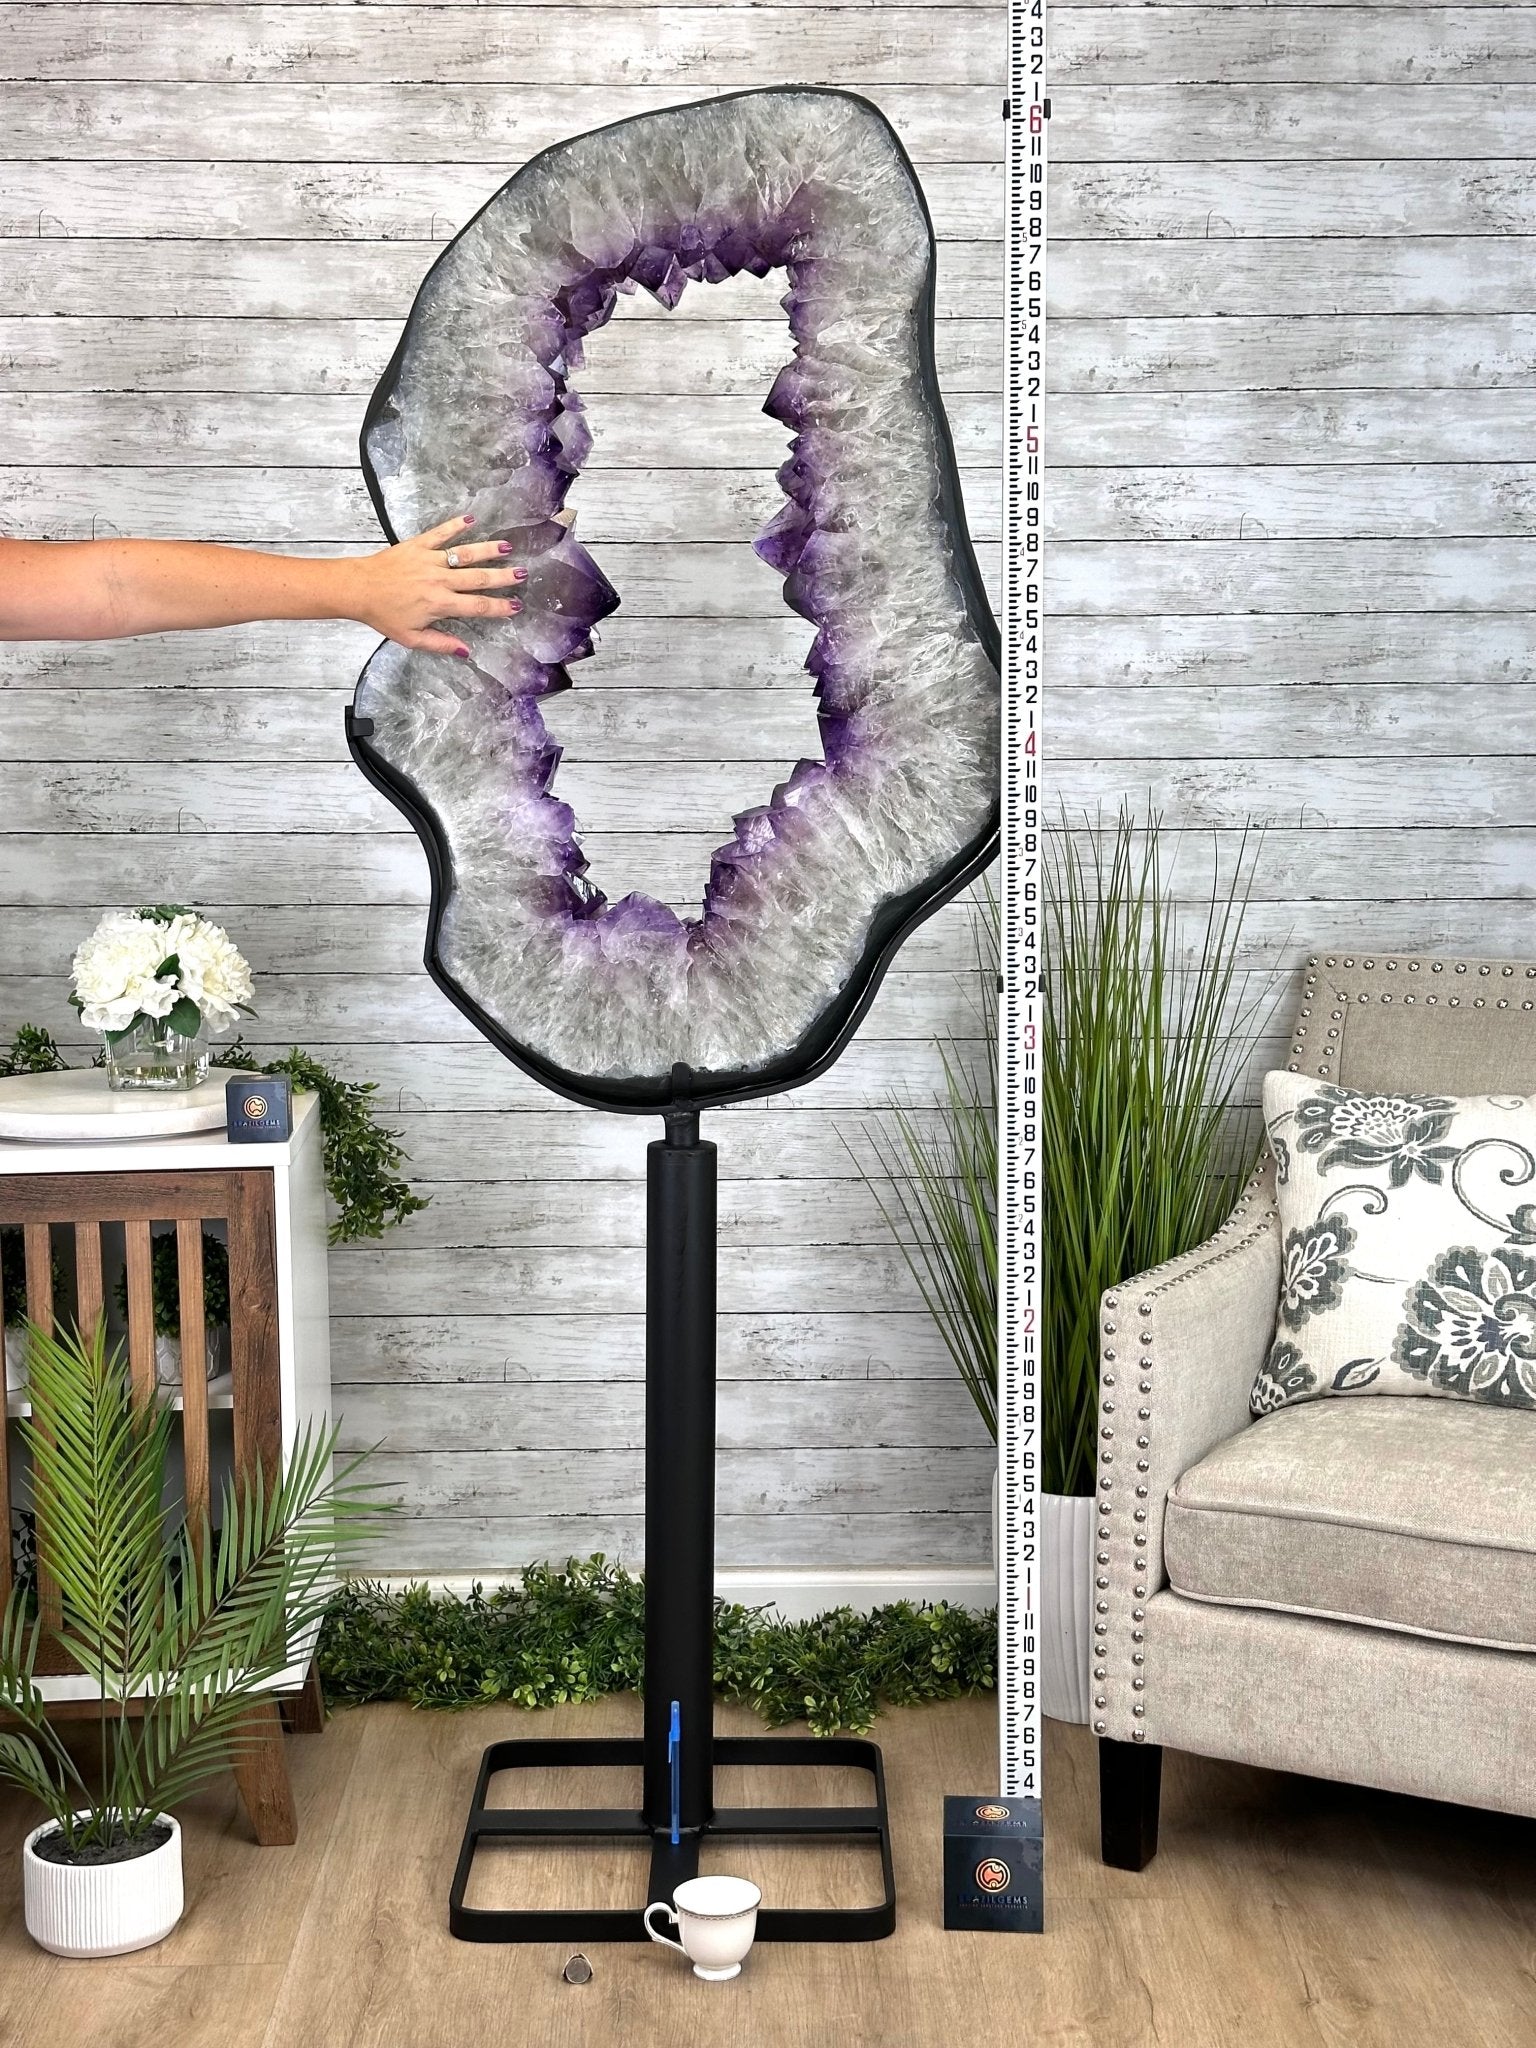 Super Quality Amethyst Portal, Rotating Stand, 170 lbs & 73" Tall #5604-0132 - Brazil GemsBrazil GemsSuper Quality Amethyst Portal, Rotating Stand, 170 lbs & 73" Tall #5604-0132Portals on Rotating Bases5604-0132